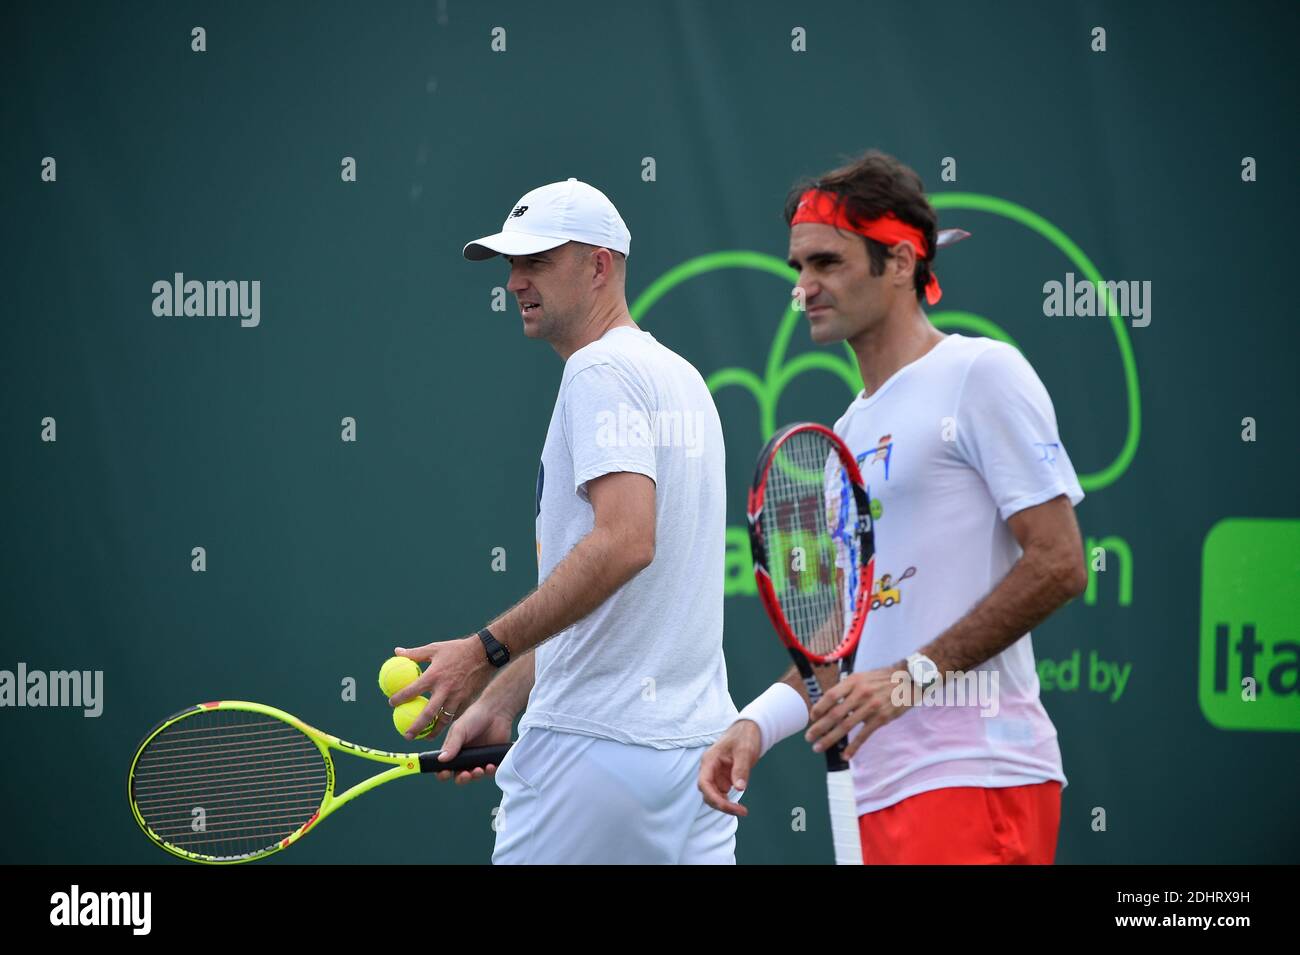 Roger Federer at practice during the Miami Open presented by Itau at  Crandon Park Tennis Center